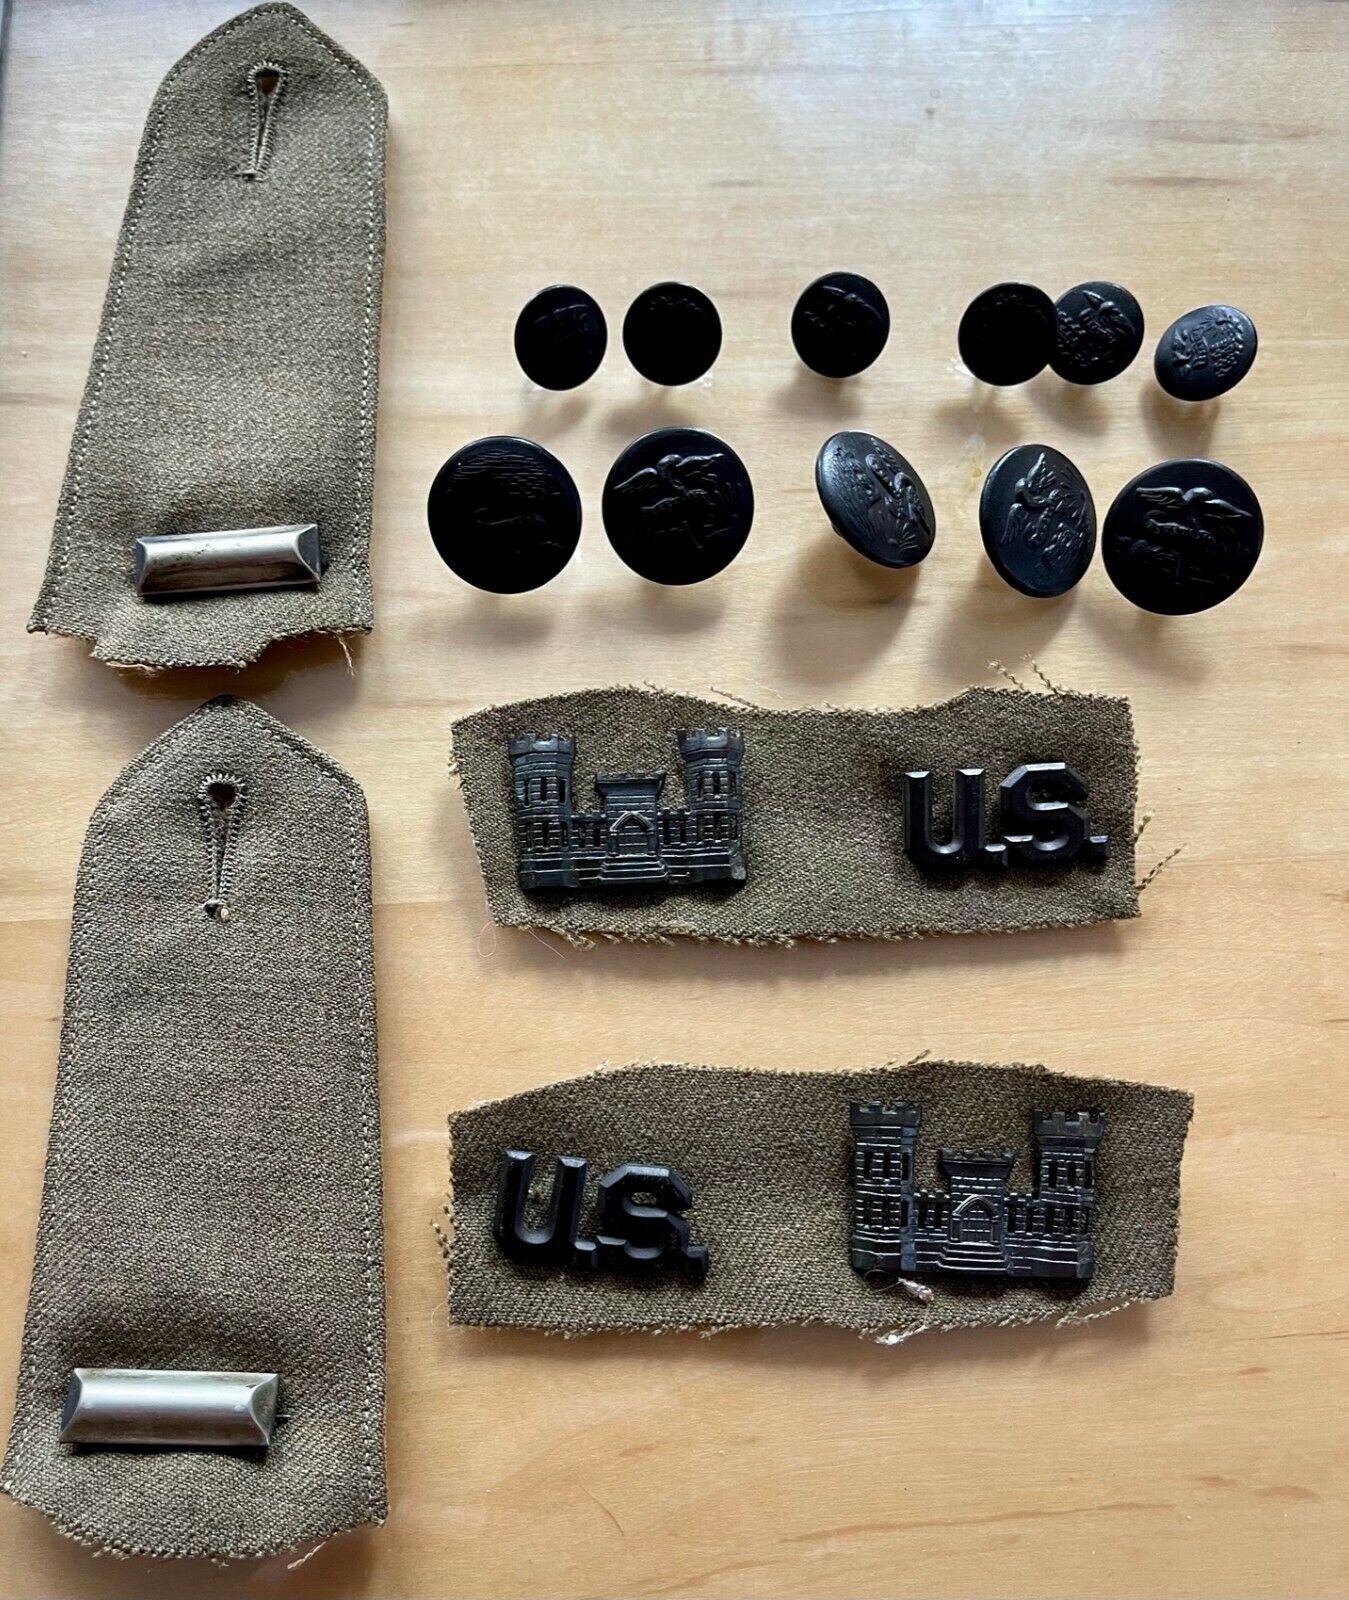 WW1 engineer insignia set. Complete set of buttons, collar tabs, shoulder tabs